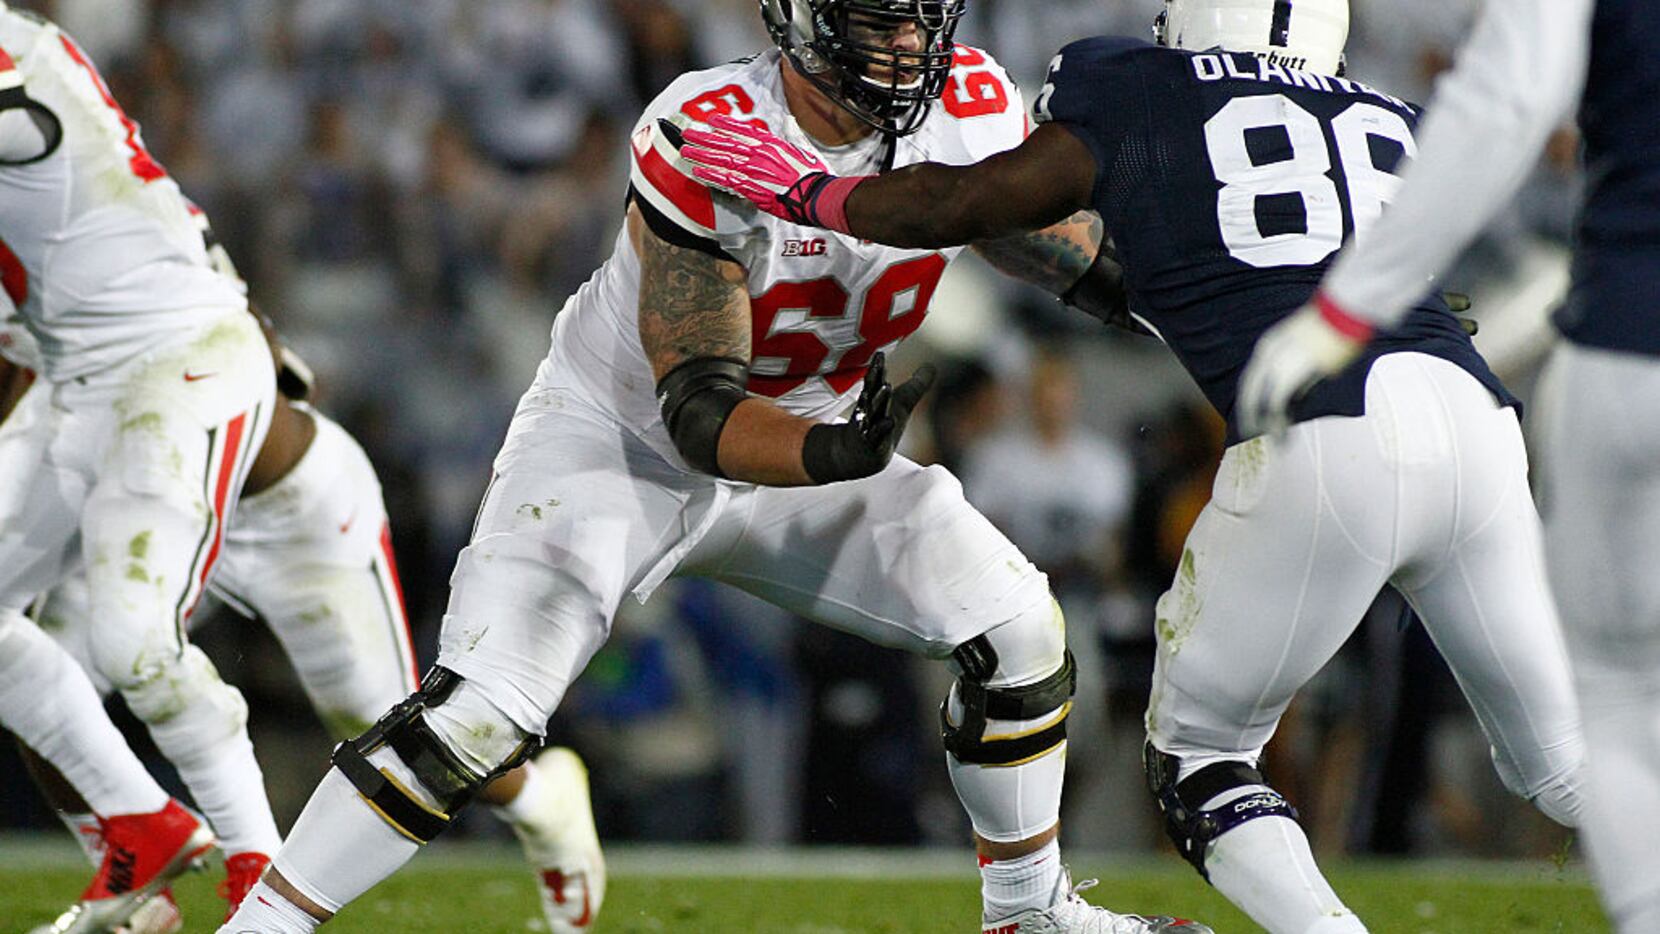 STATE COLLEGE, PA - OCTOBER 25:  Taylor Decker #68 of the Ohio State Buckeyes blocks during...